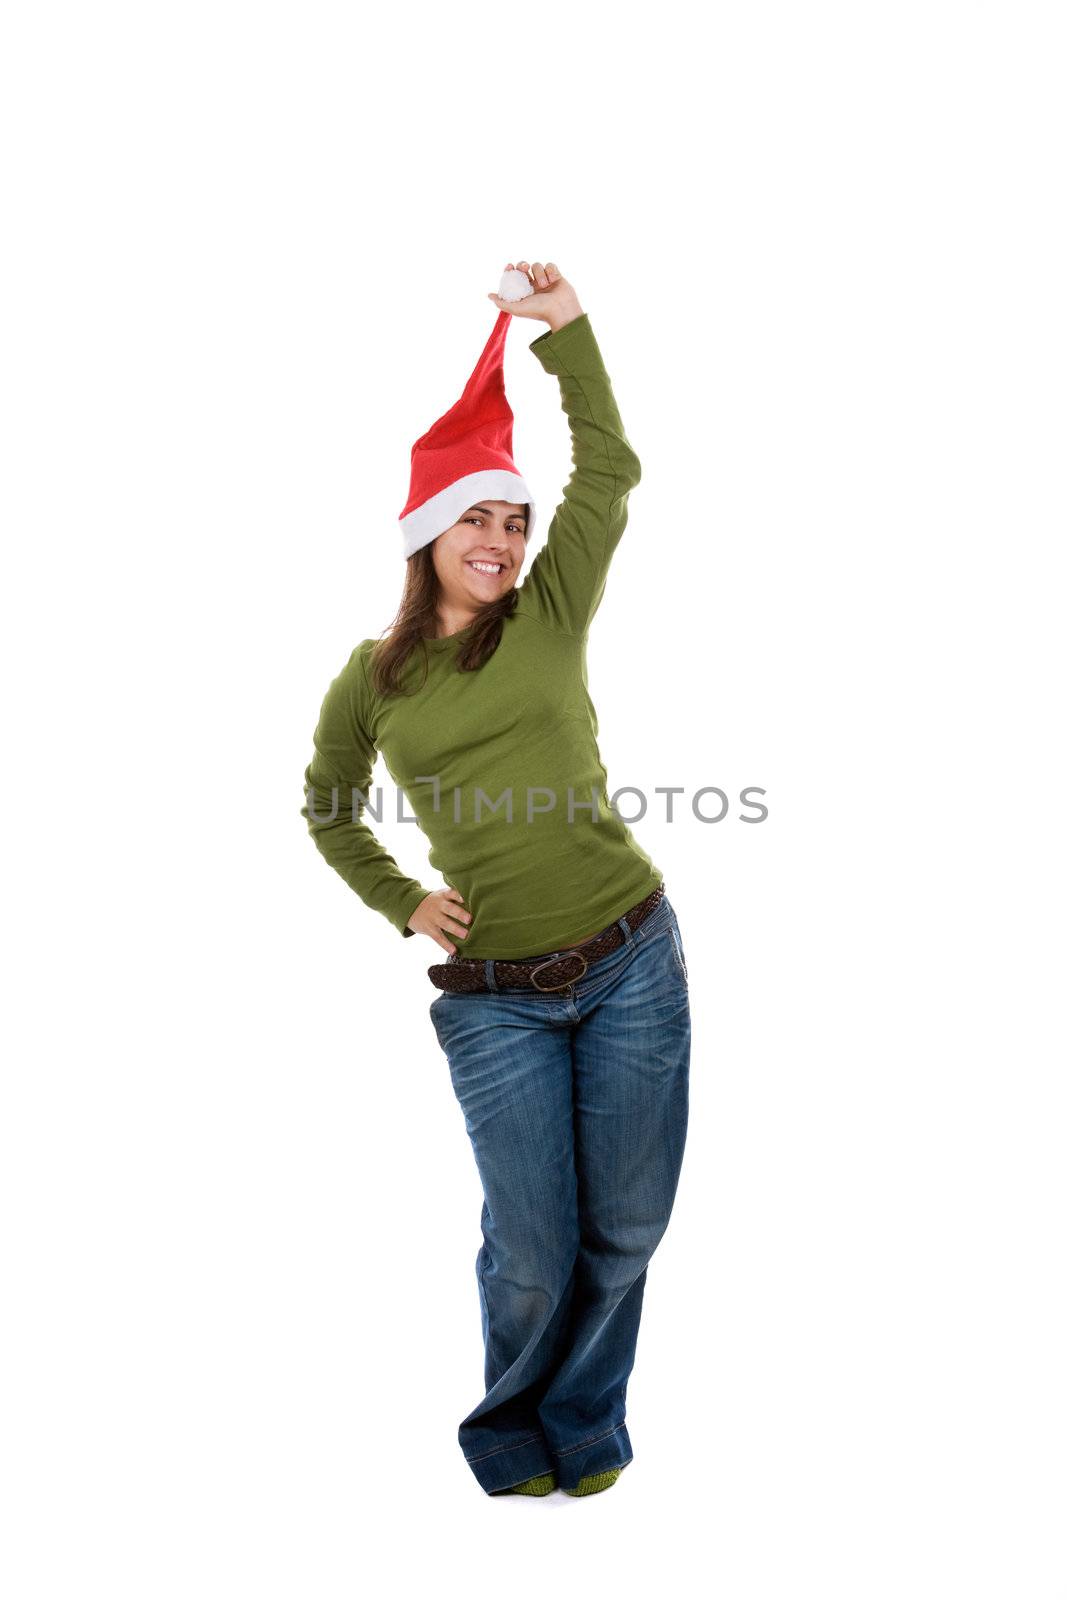 young santa woman in green shirt holding her hat. isolated on white background.